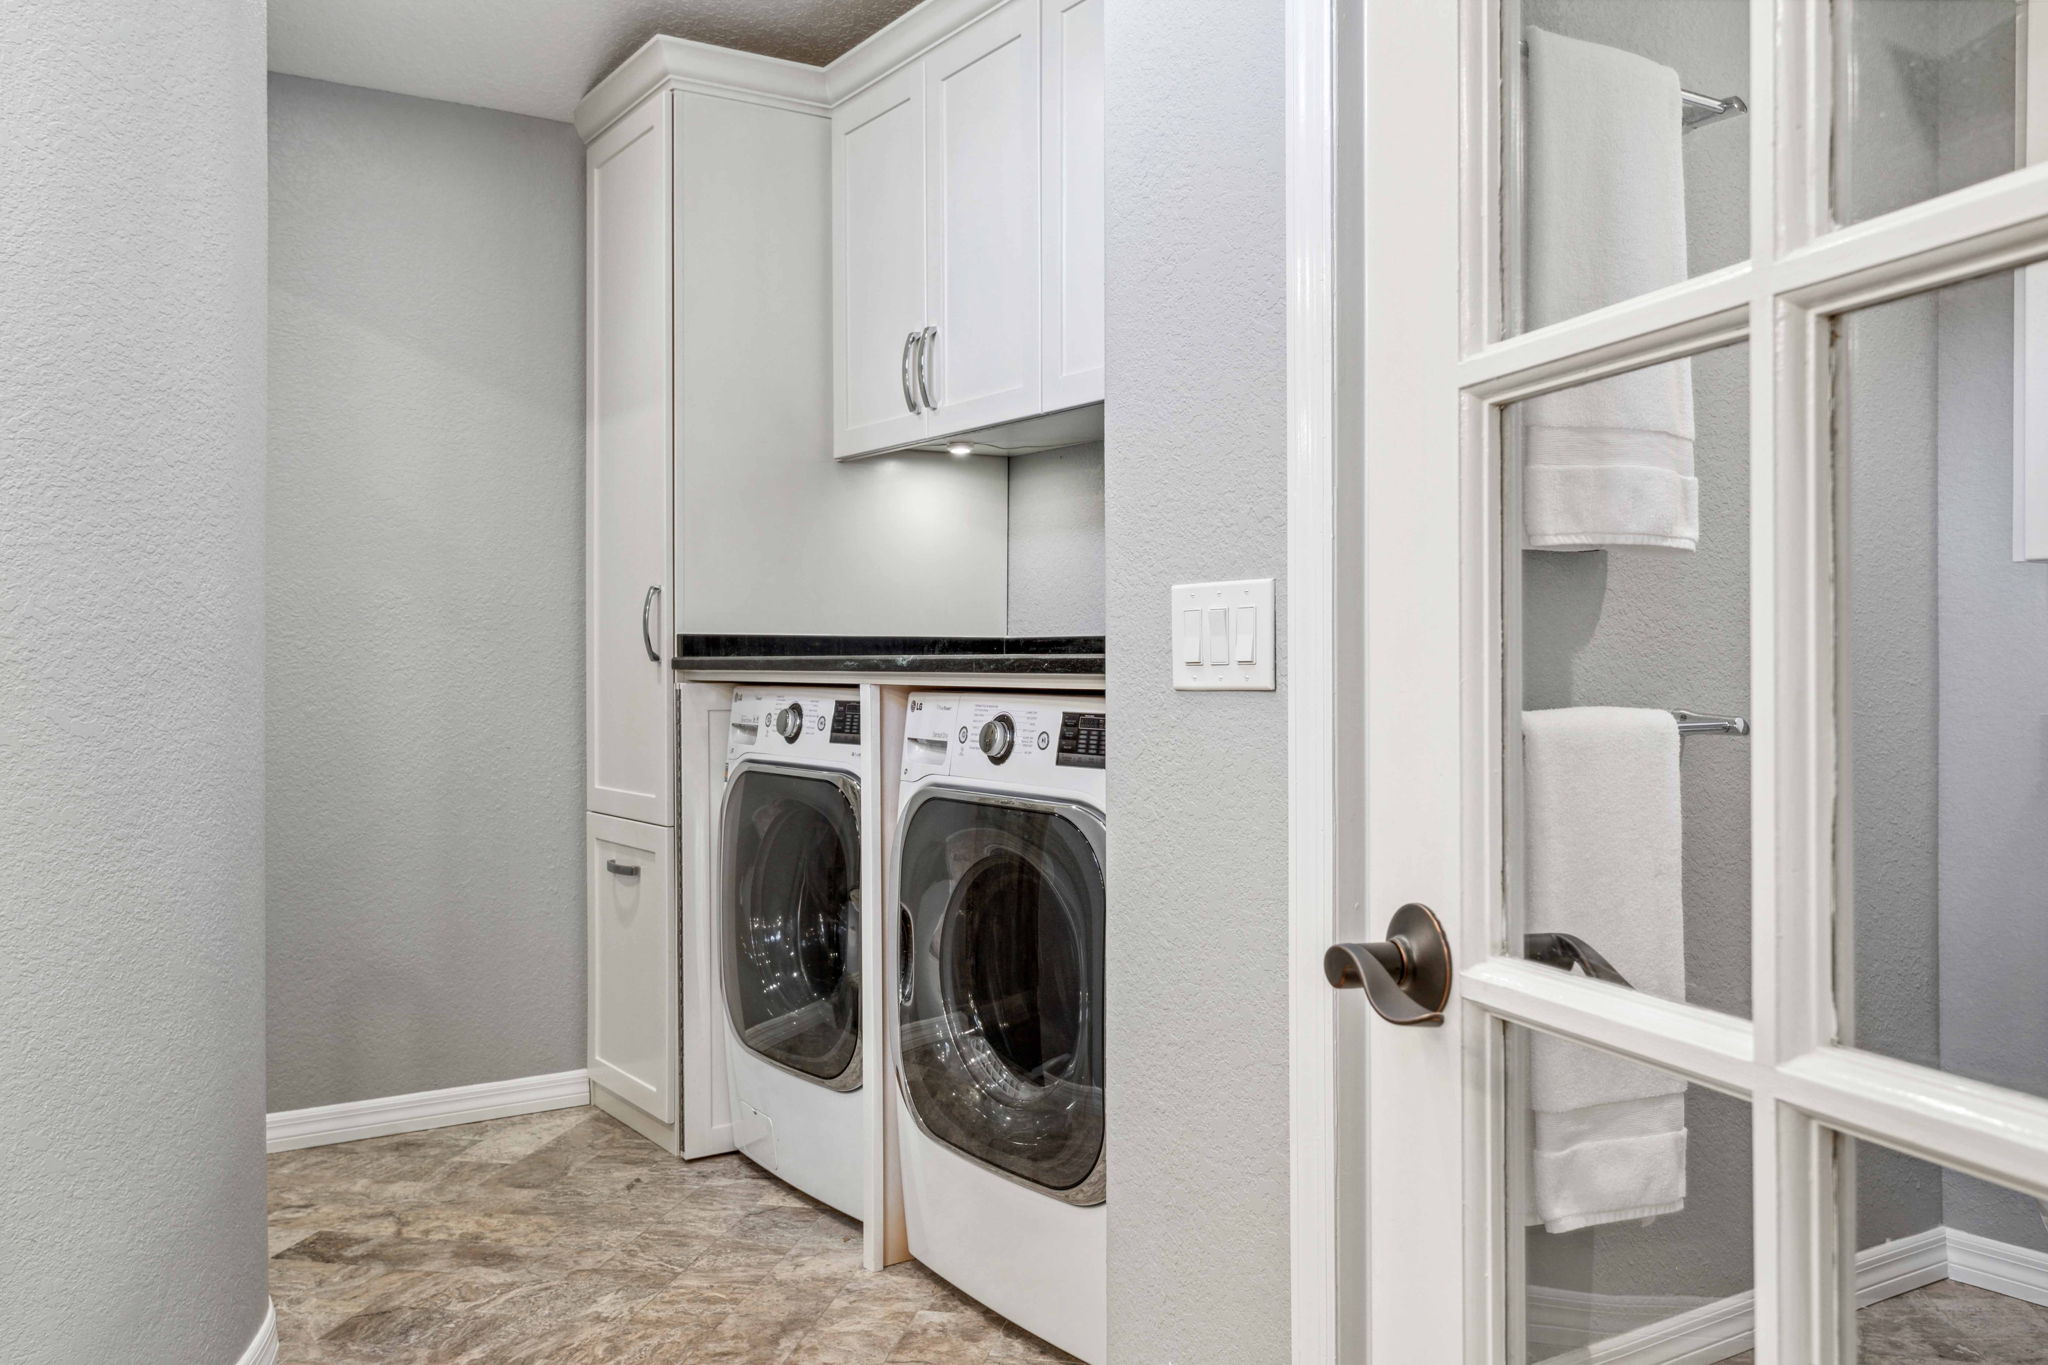 Primary Bath - custom built-in cabinets for washer/dryer